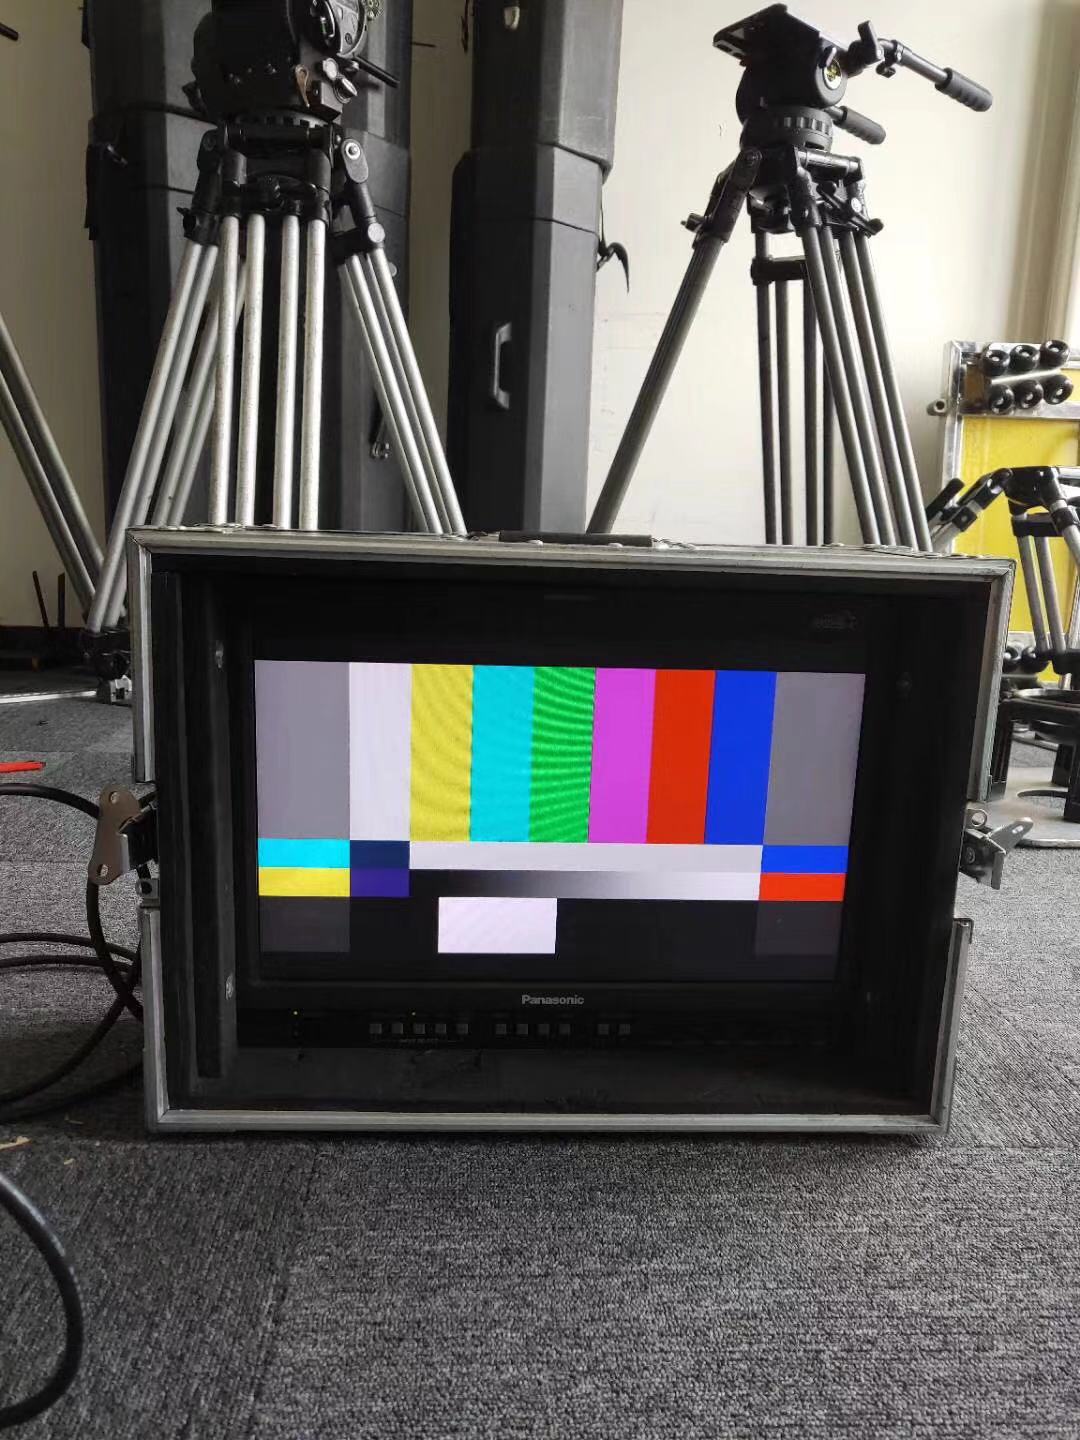  Sold a second-hand Panasonic 1700, 17 inch director monitor. If necessary, please contact us at any time